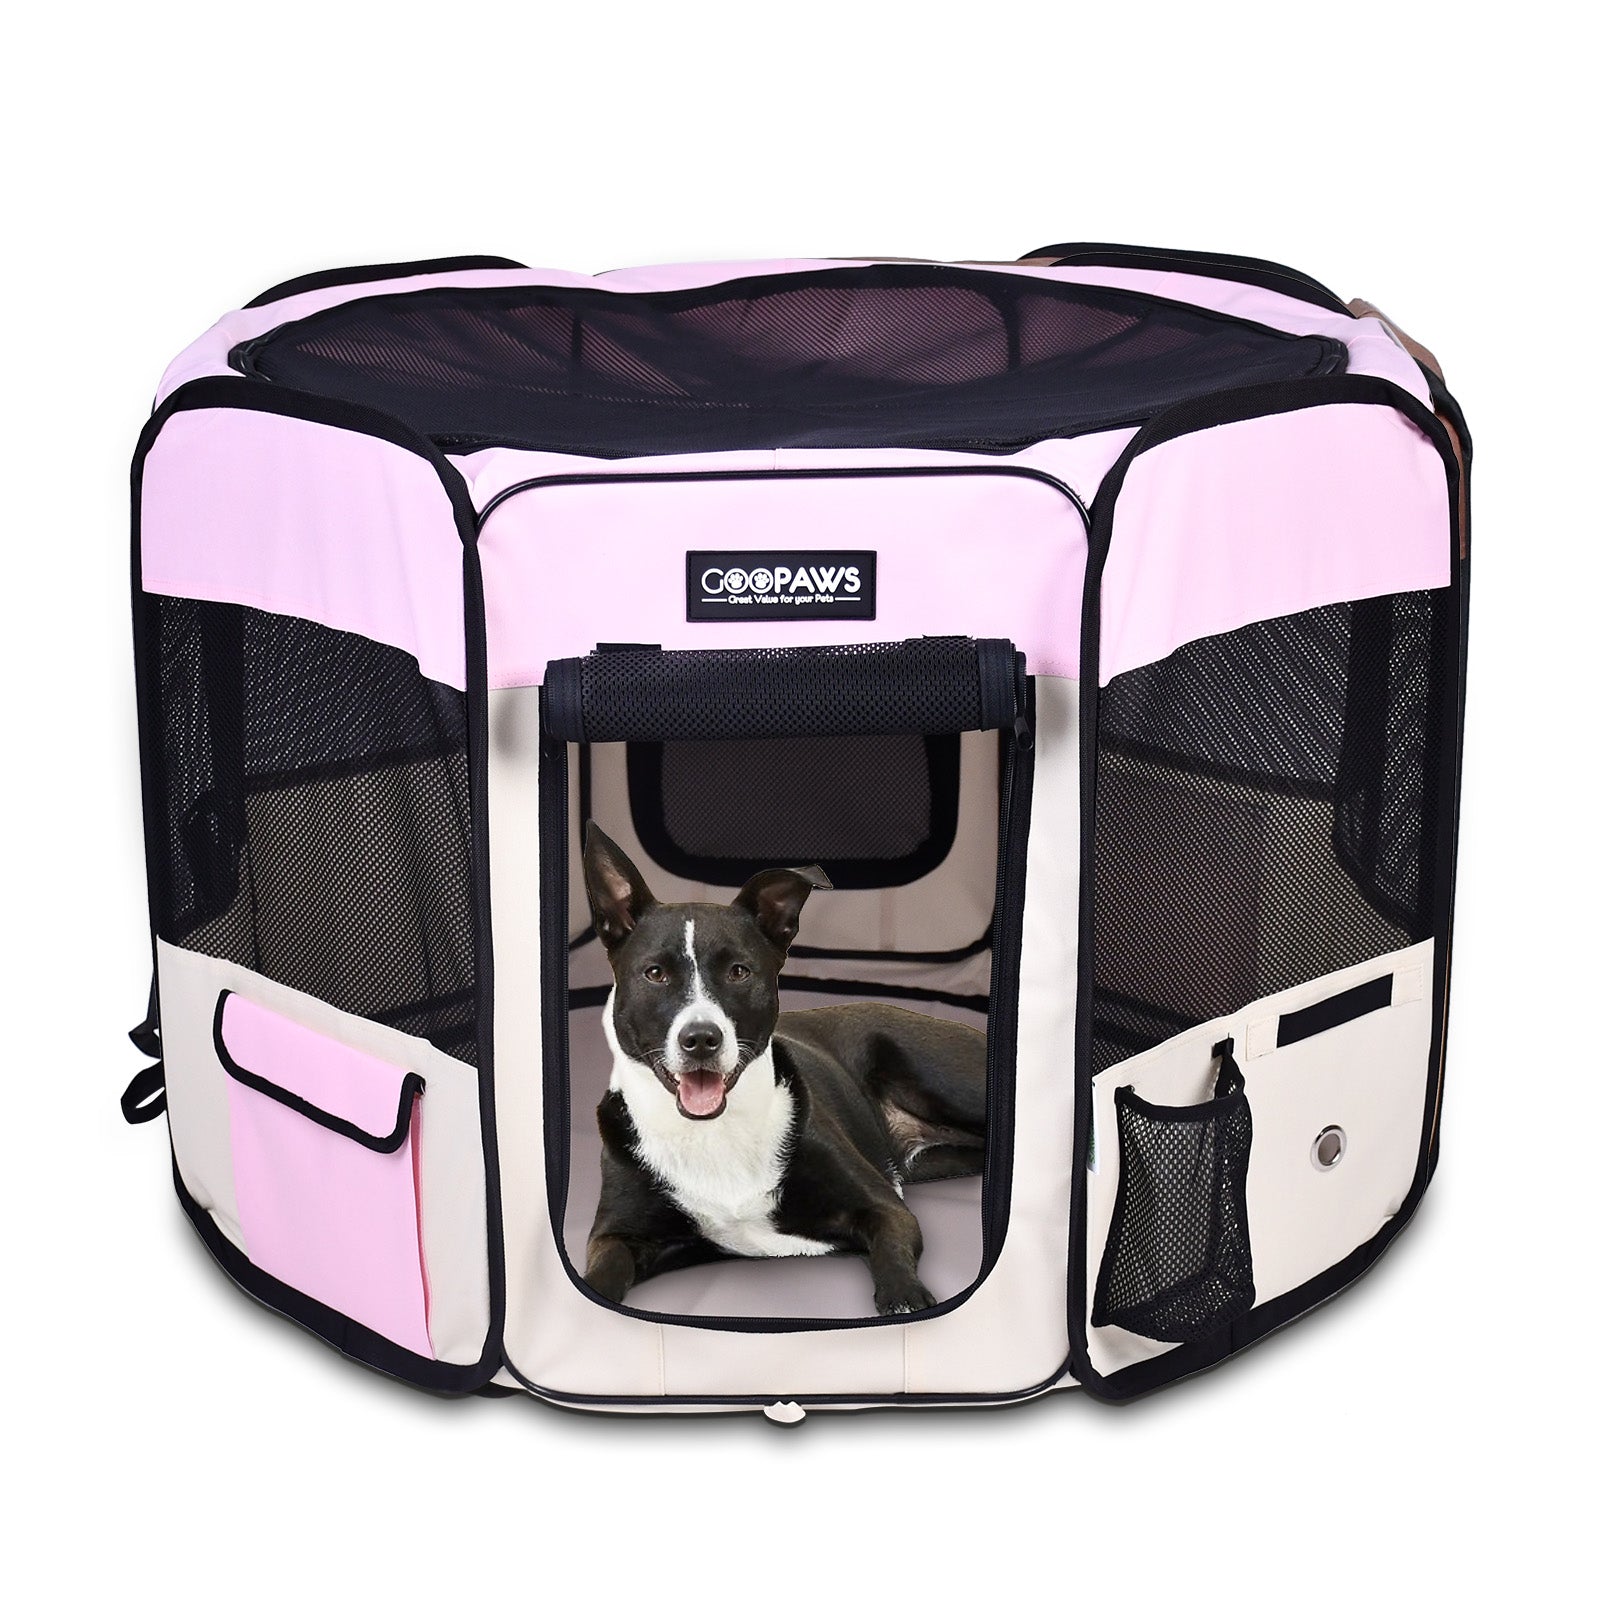 Jespet 2-Door Portable Soft-Sided Dog, Cat & Small Pet Exercise Playpen, Pink, 45''